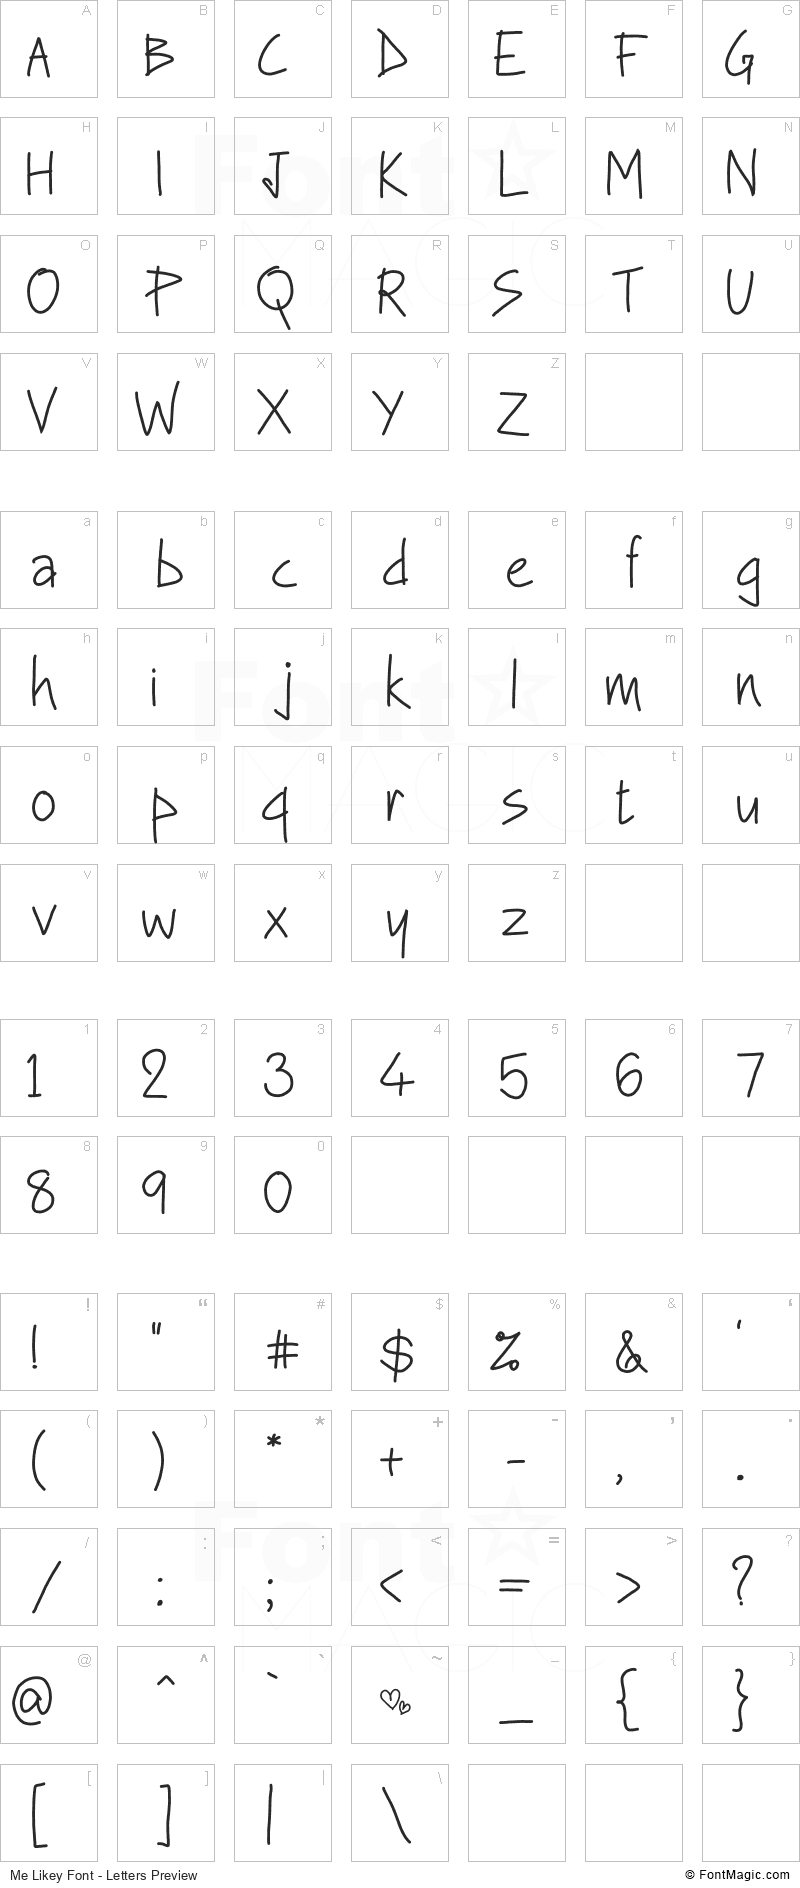 Me Likey Font - All Latters Preview Chart